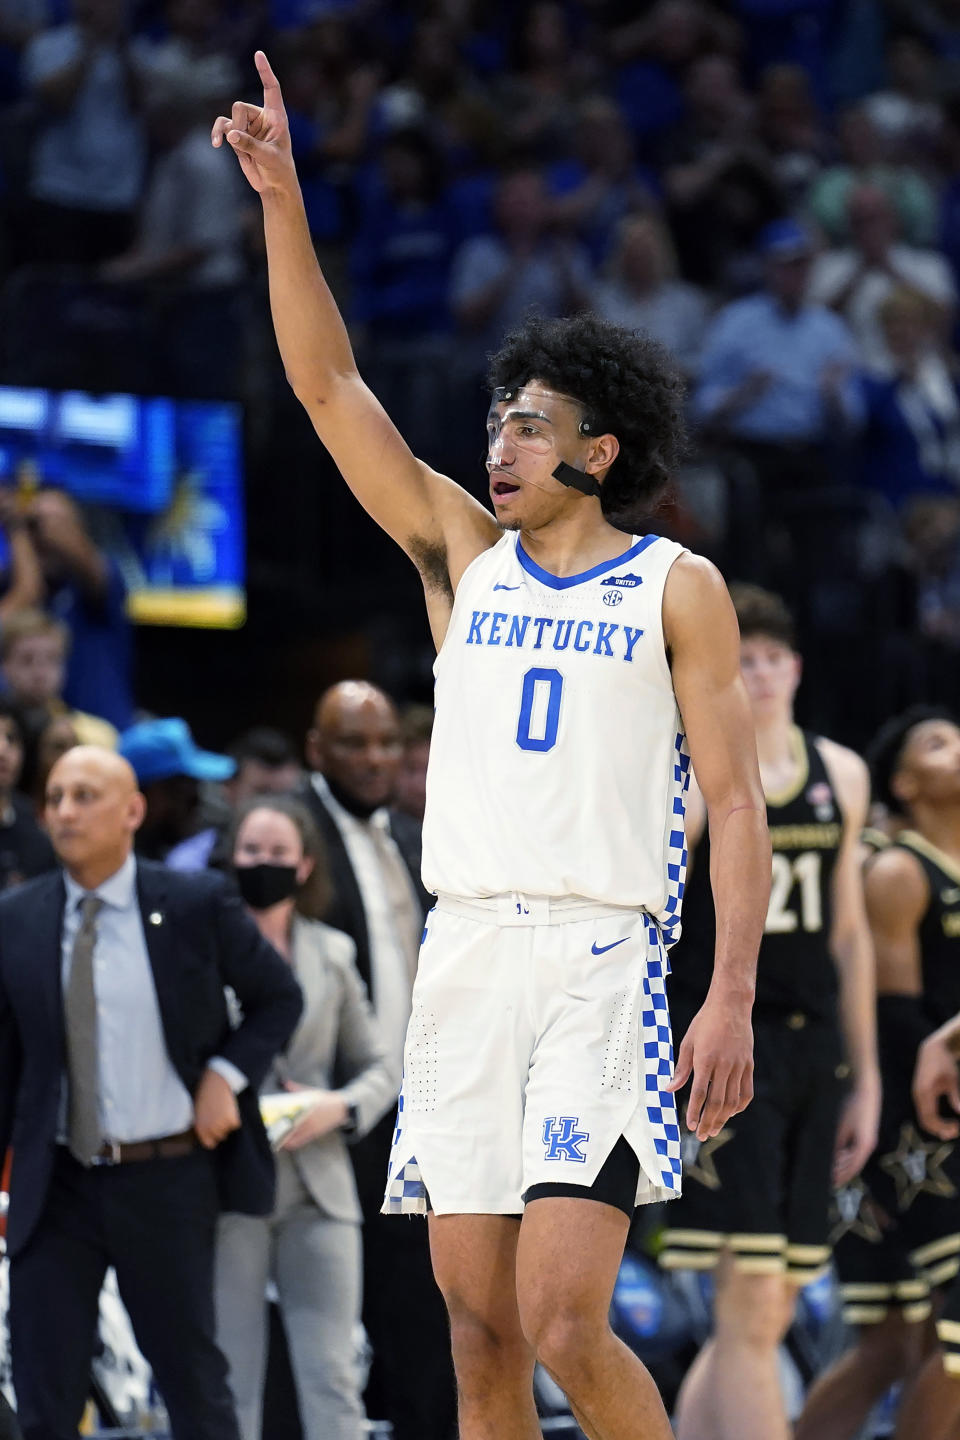 Kentucky forward Jacob Toppin (0) celebrates during the second half of the team's NCAA college basketball game against Vanderbilt in the Southeastern Conference men's tournamentFriday, March 11, 2022, in Tampa, Fla. (AP Photo/Chris O'Meara)